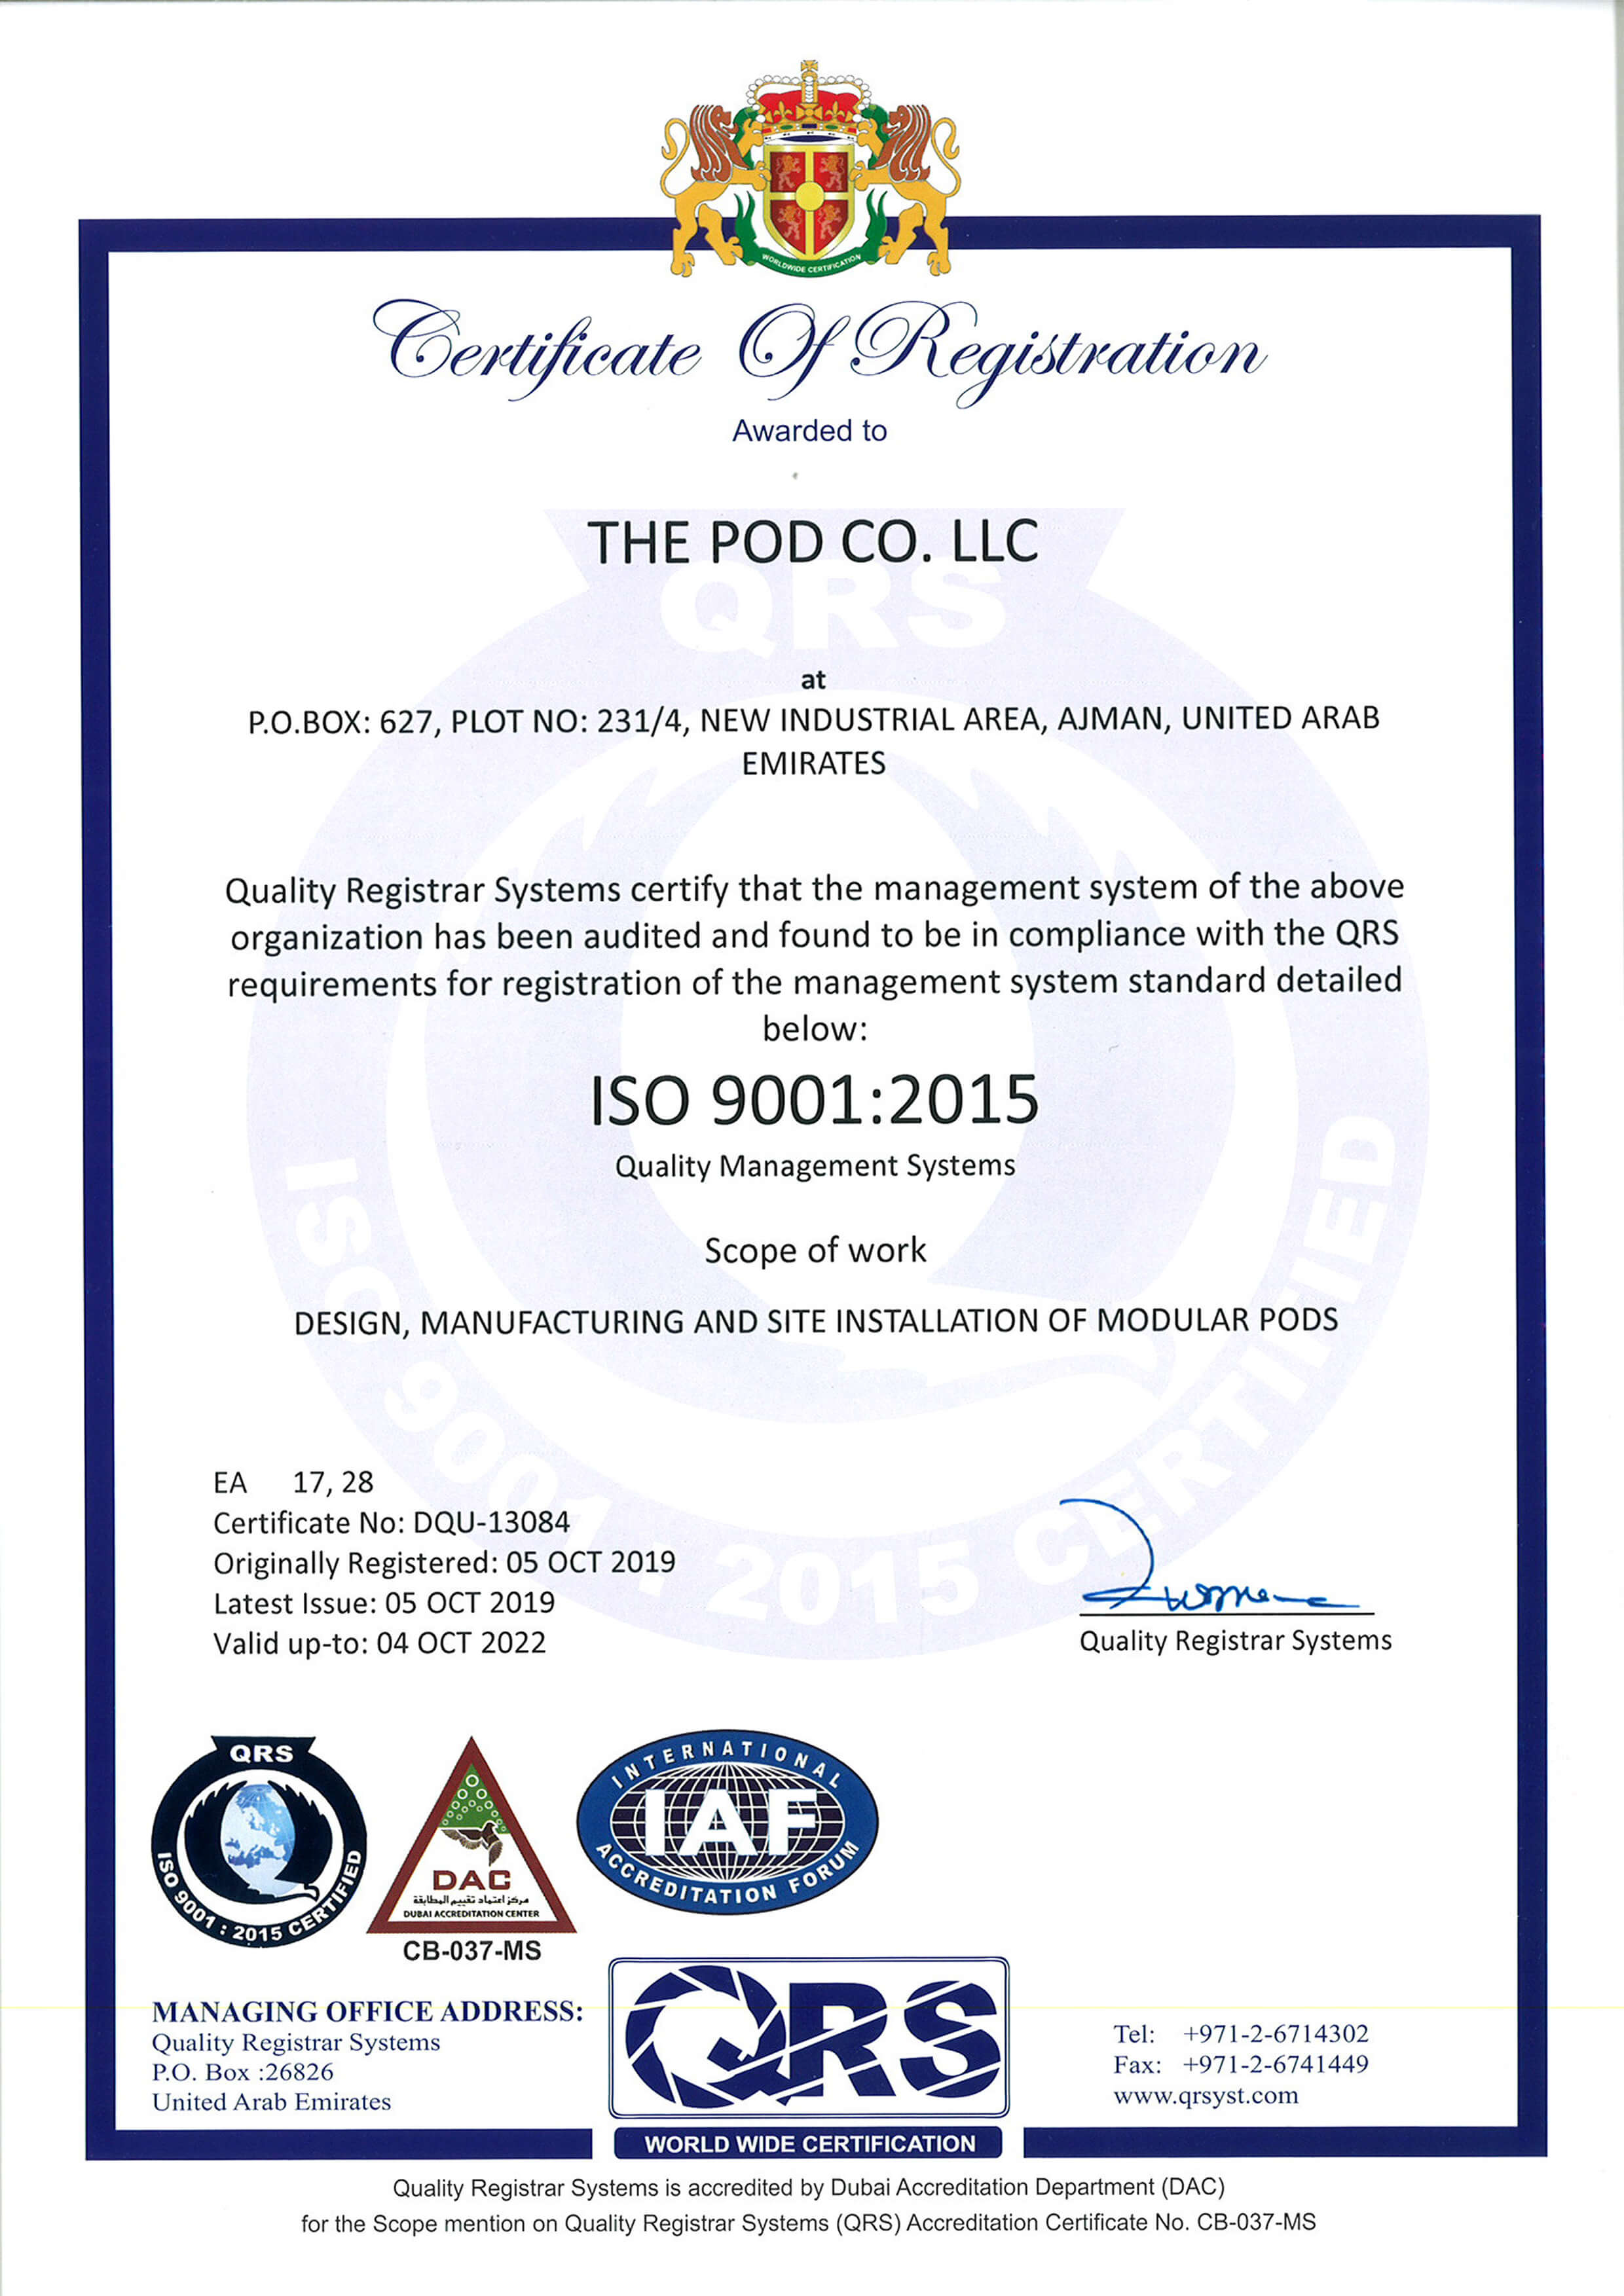 The pod Company ISO 9001 Certificate